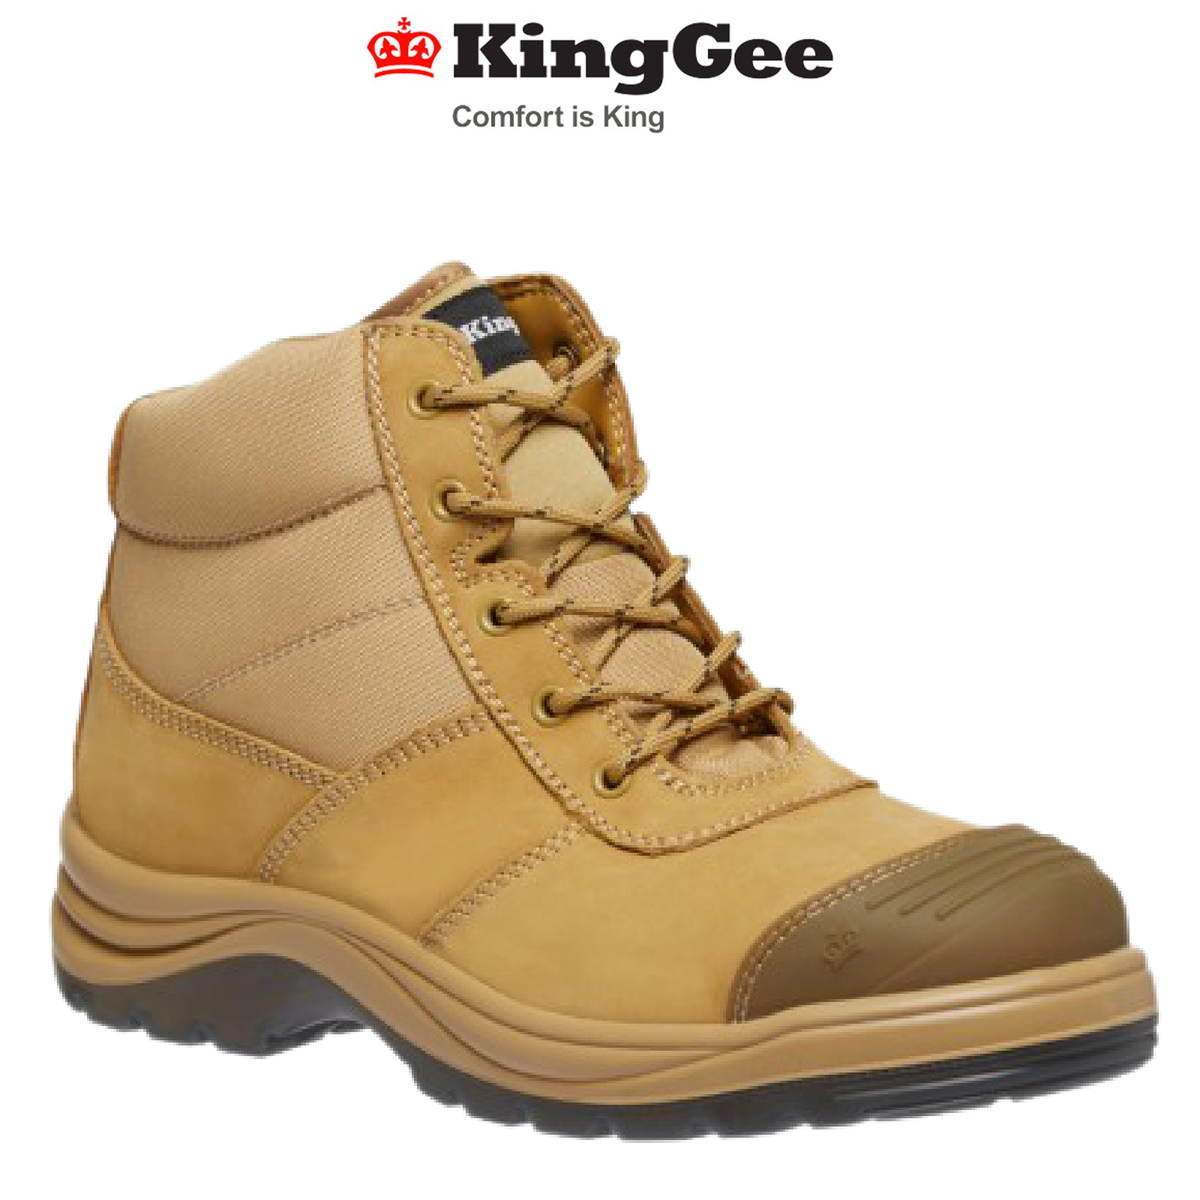 KingGee Mens Tradie Boot Waterproof Breathable Leather Work Boots Safety K27100